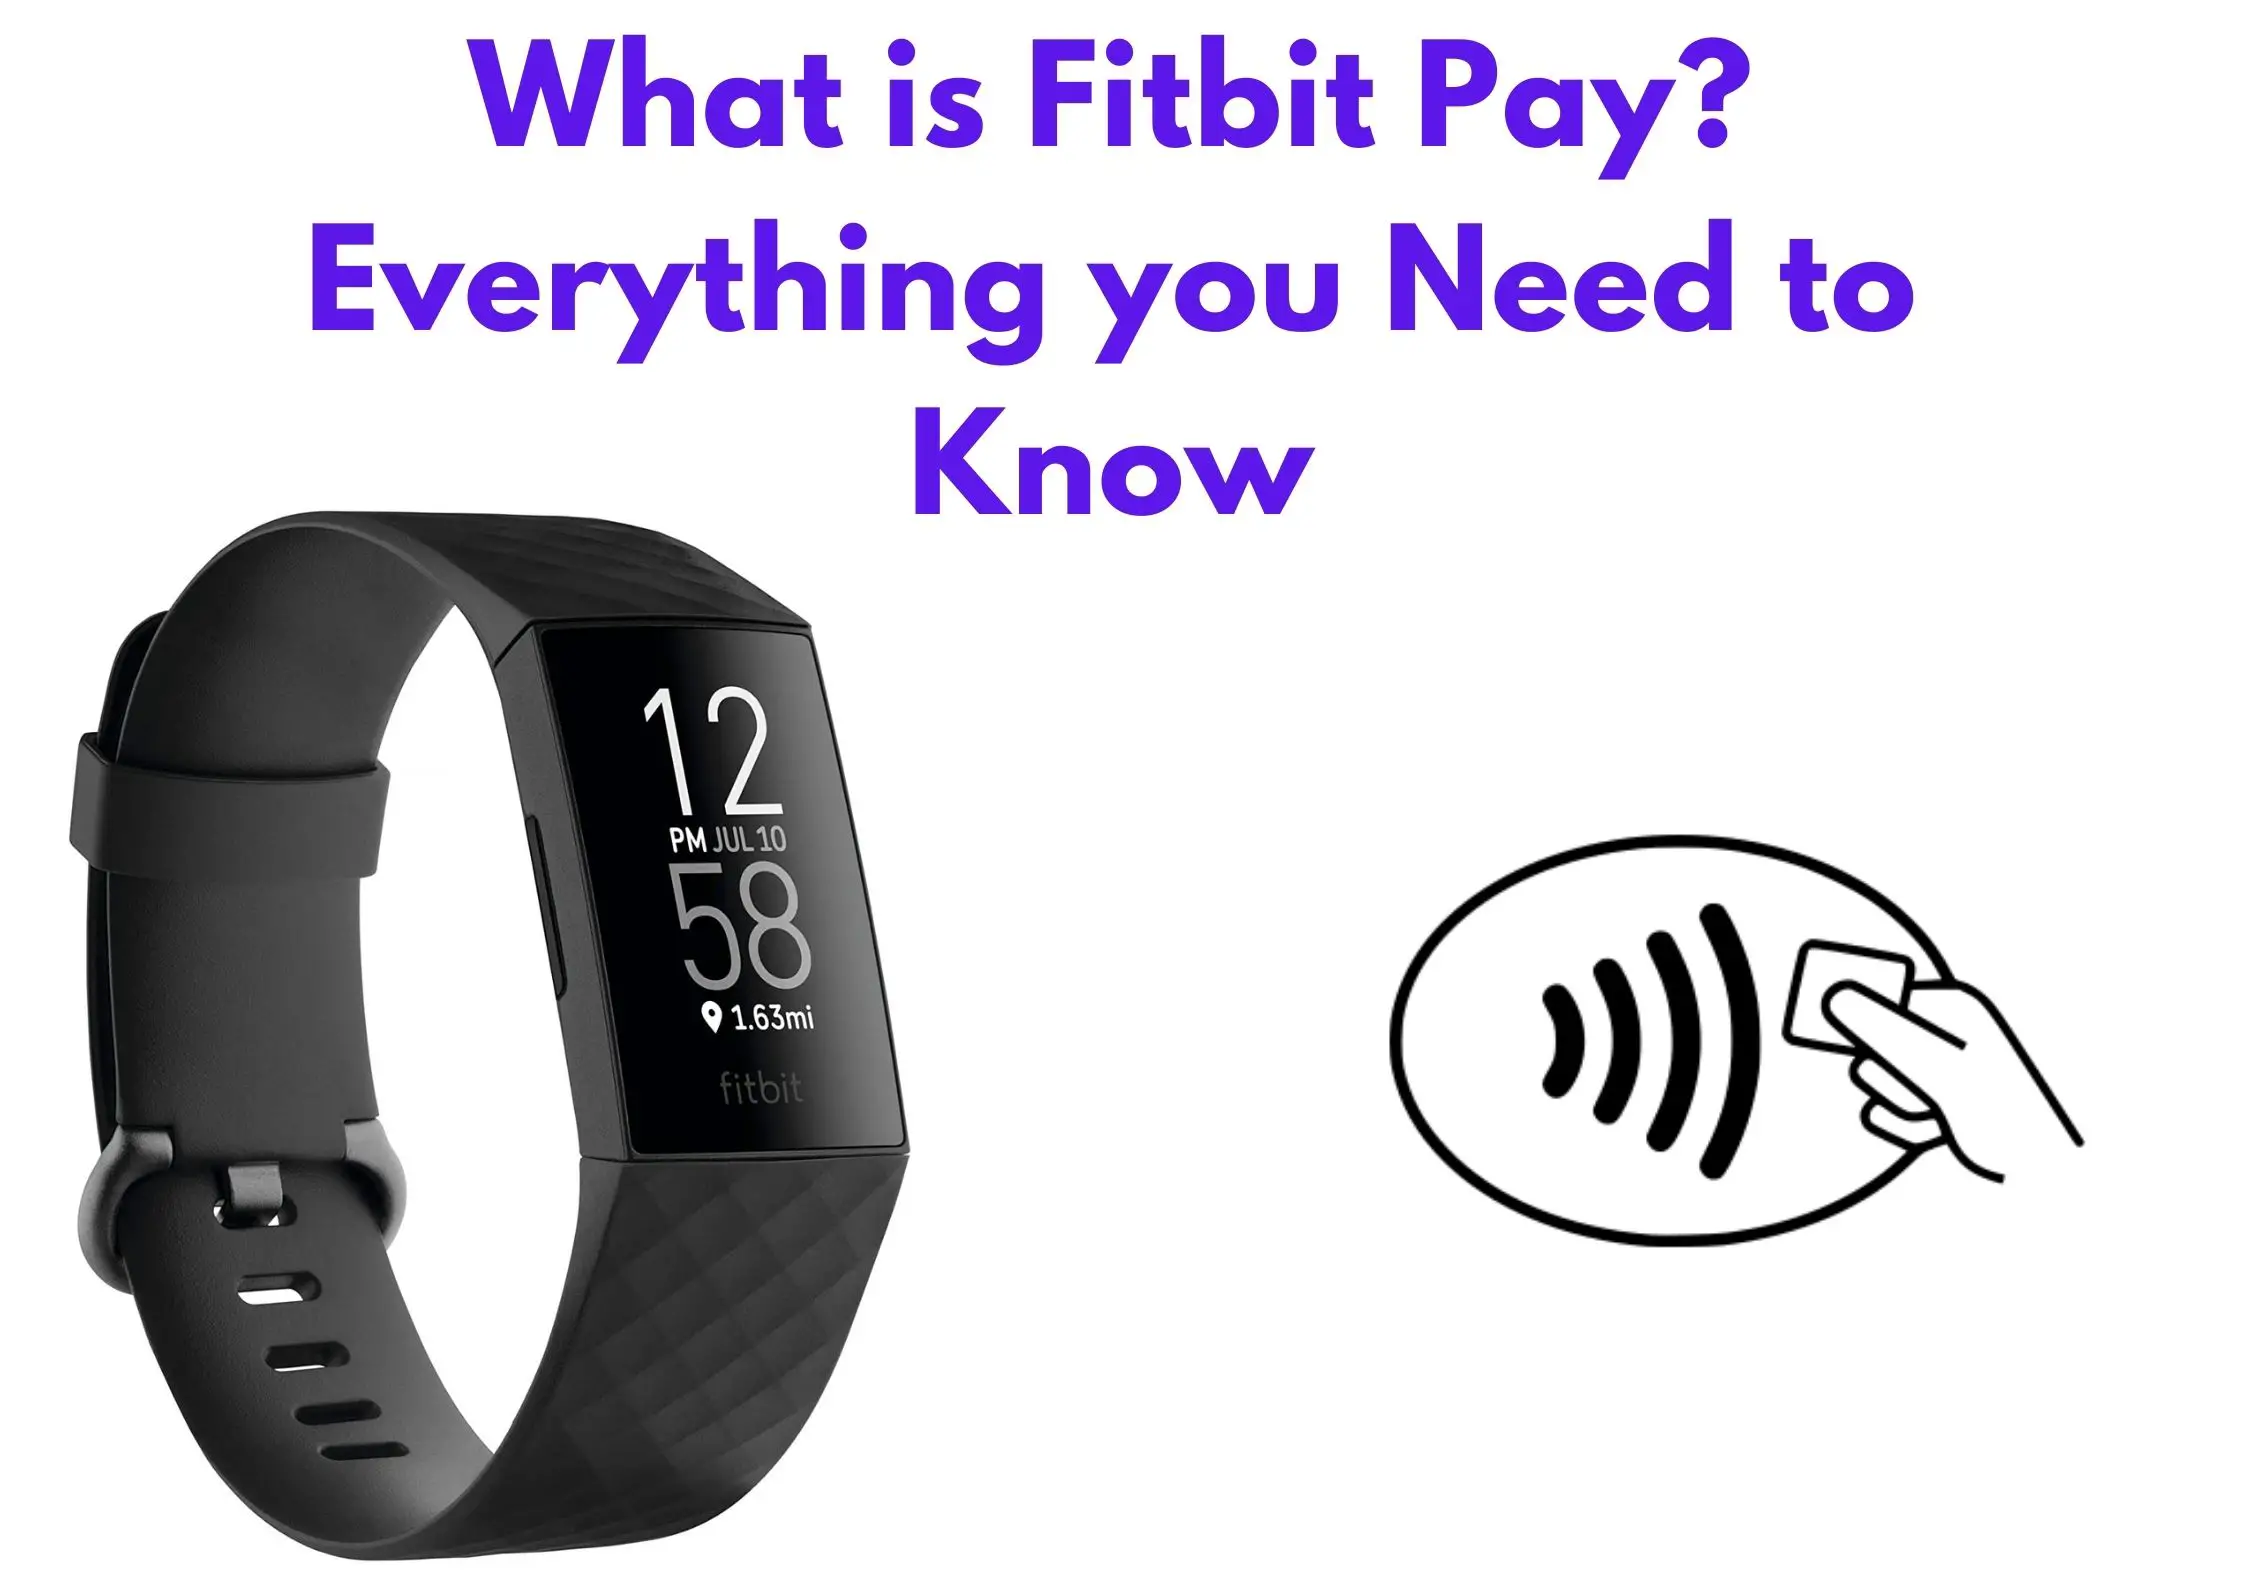 What is Fitbit Pay? Everything you Need to Know